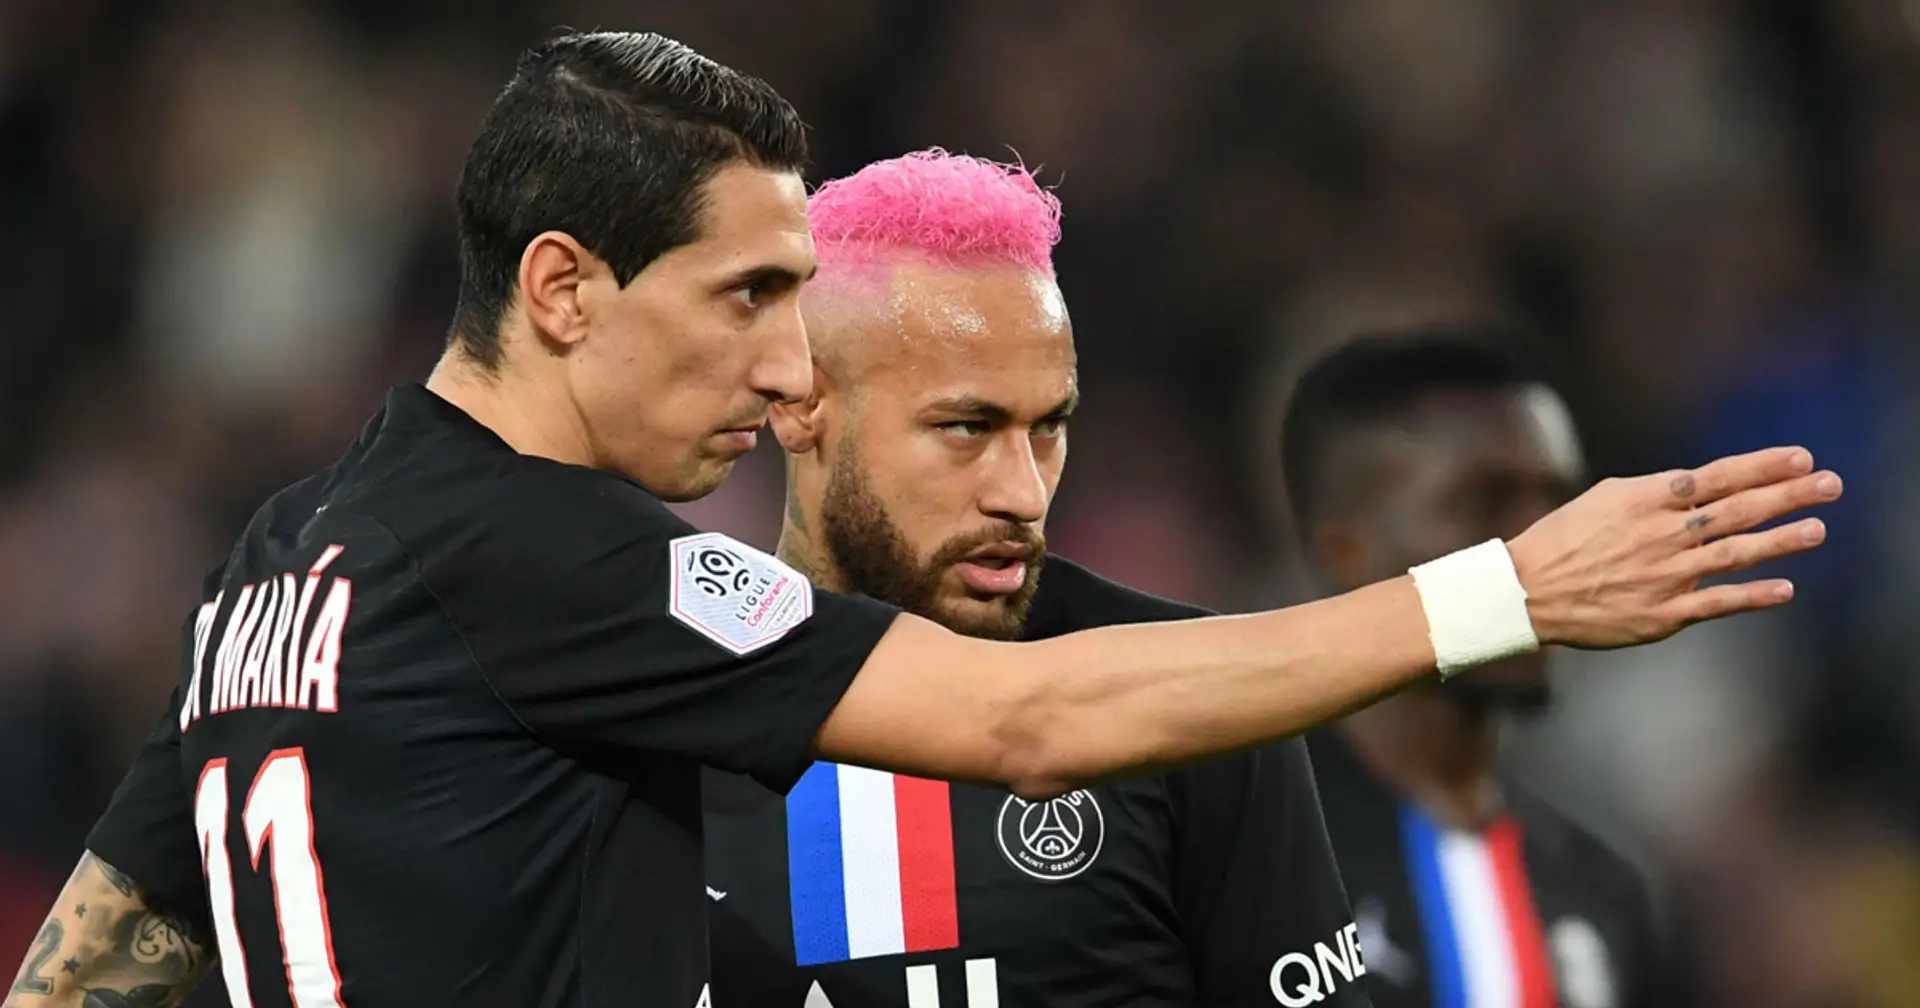 6 of PSG's first-teamers test positive for coronavirus, Neymar and Di Maria among them